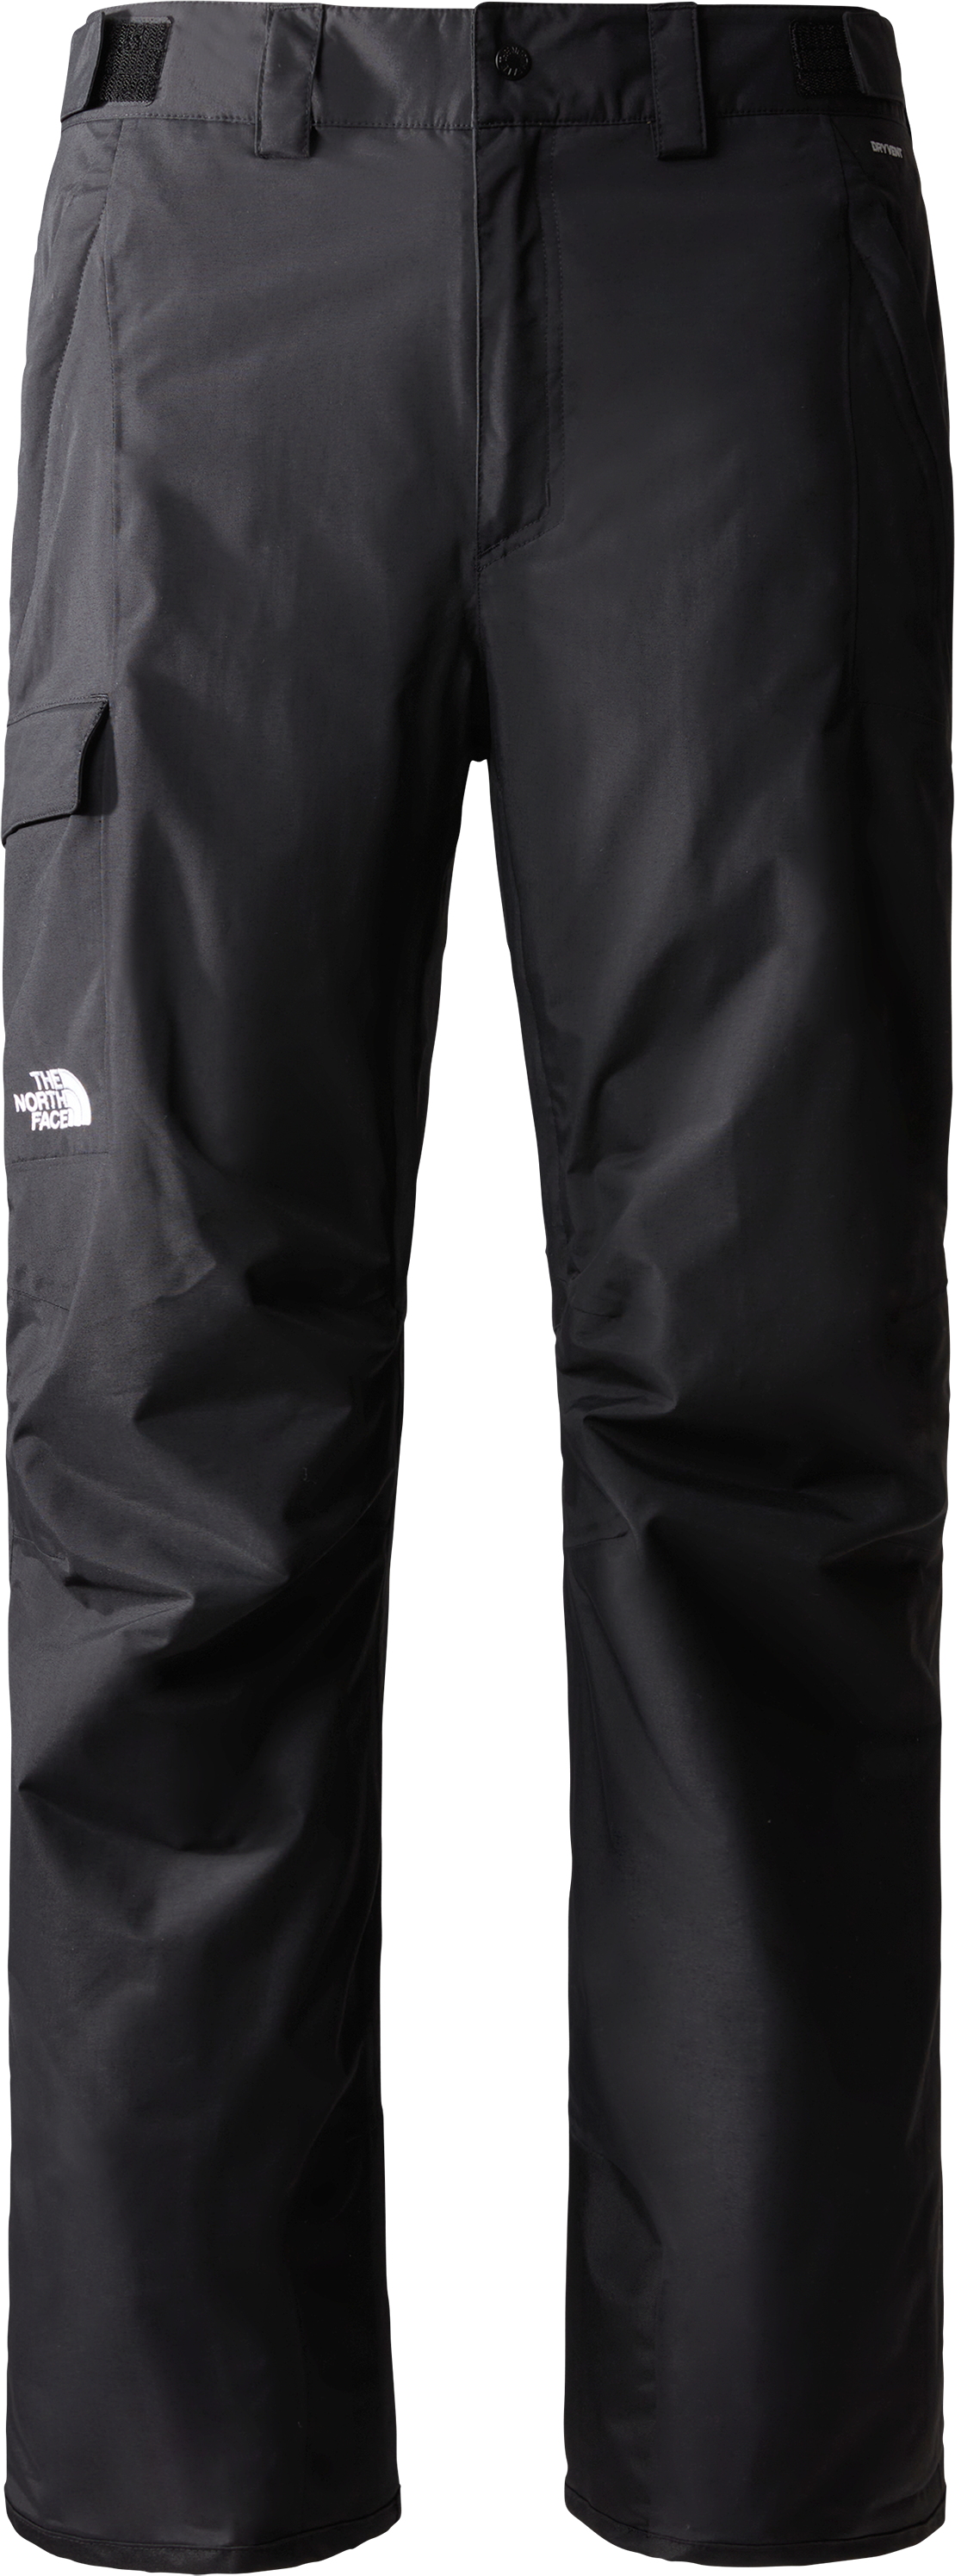 The North Face Ski Freedom water resistant DryVent ski trousers in black